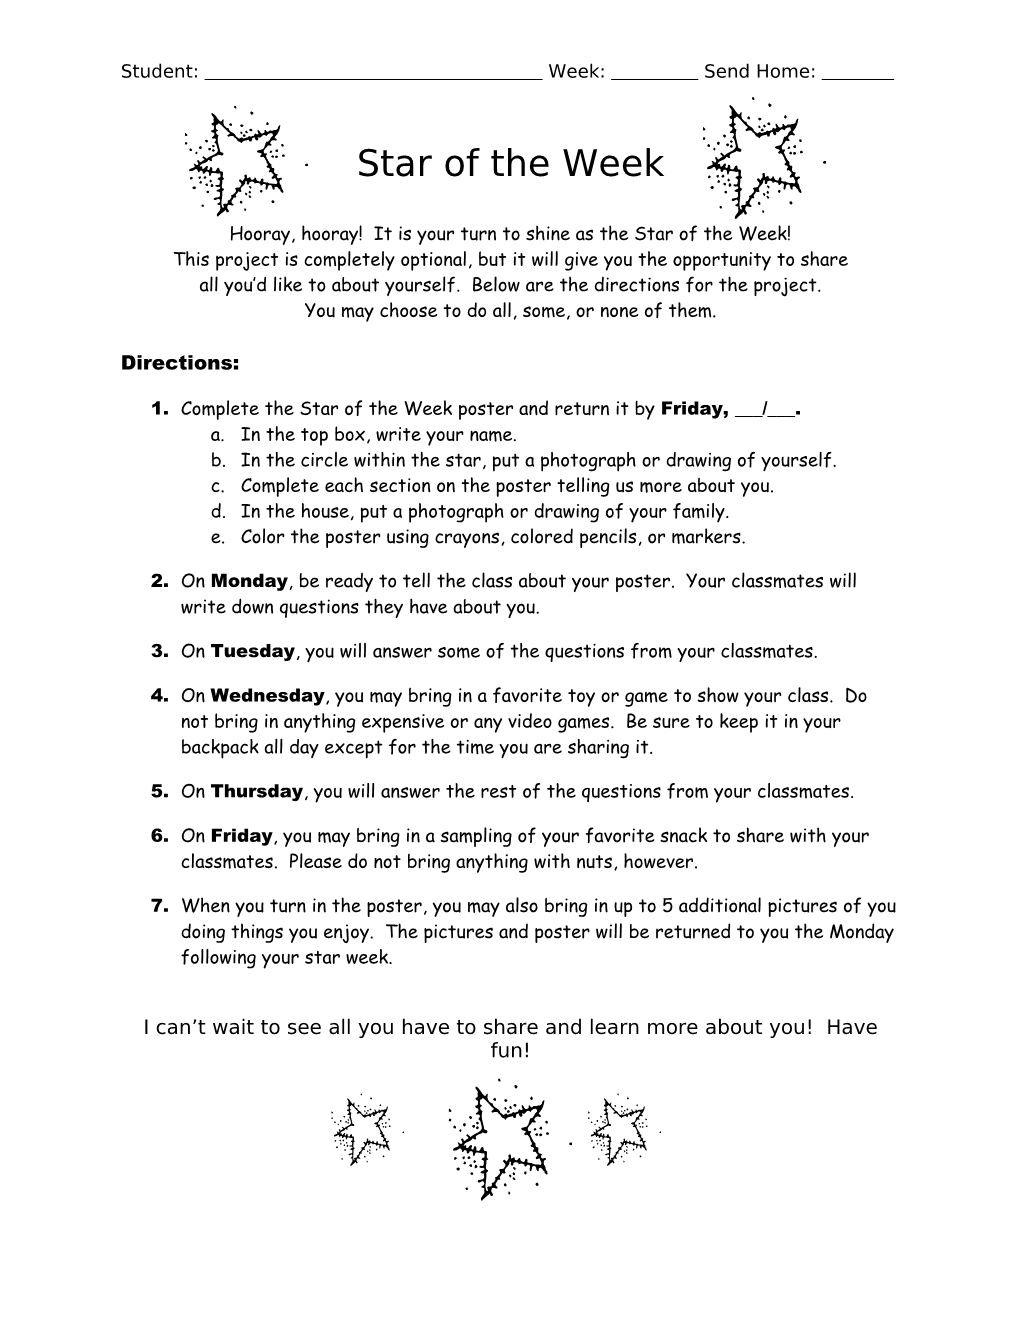 Star of the Week s1